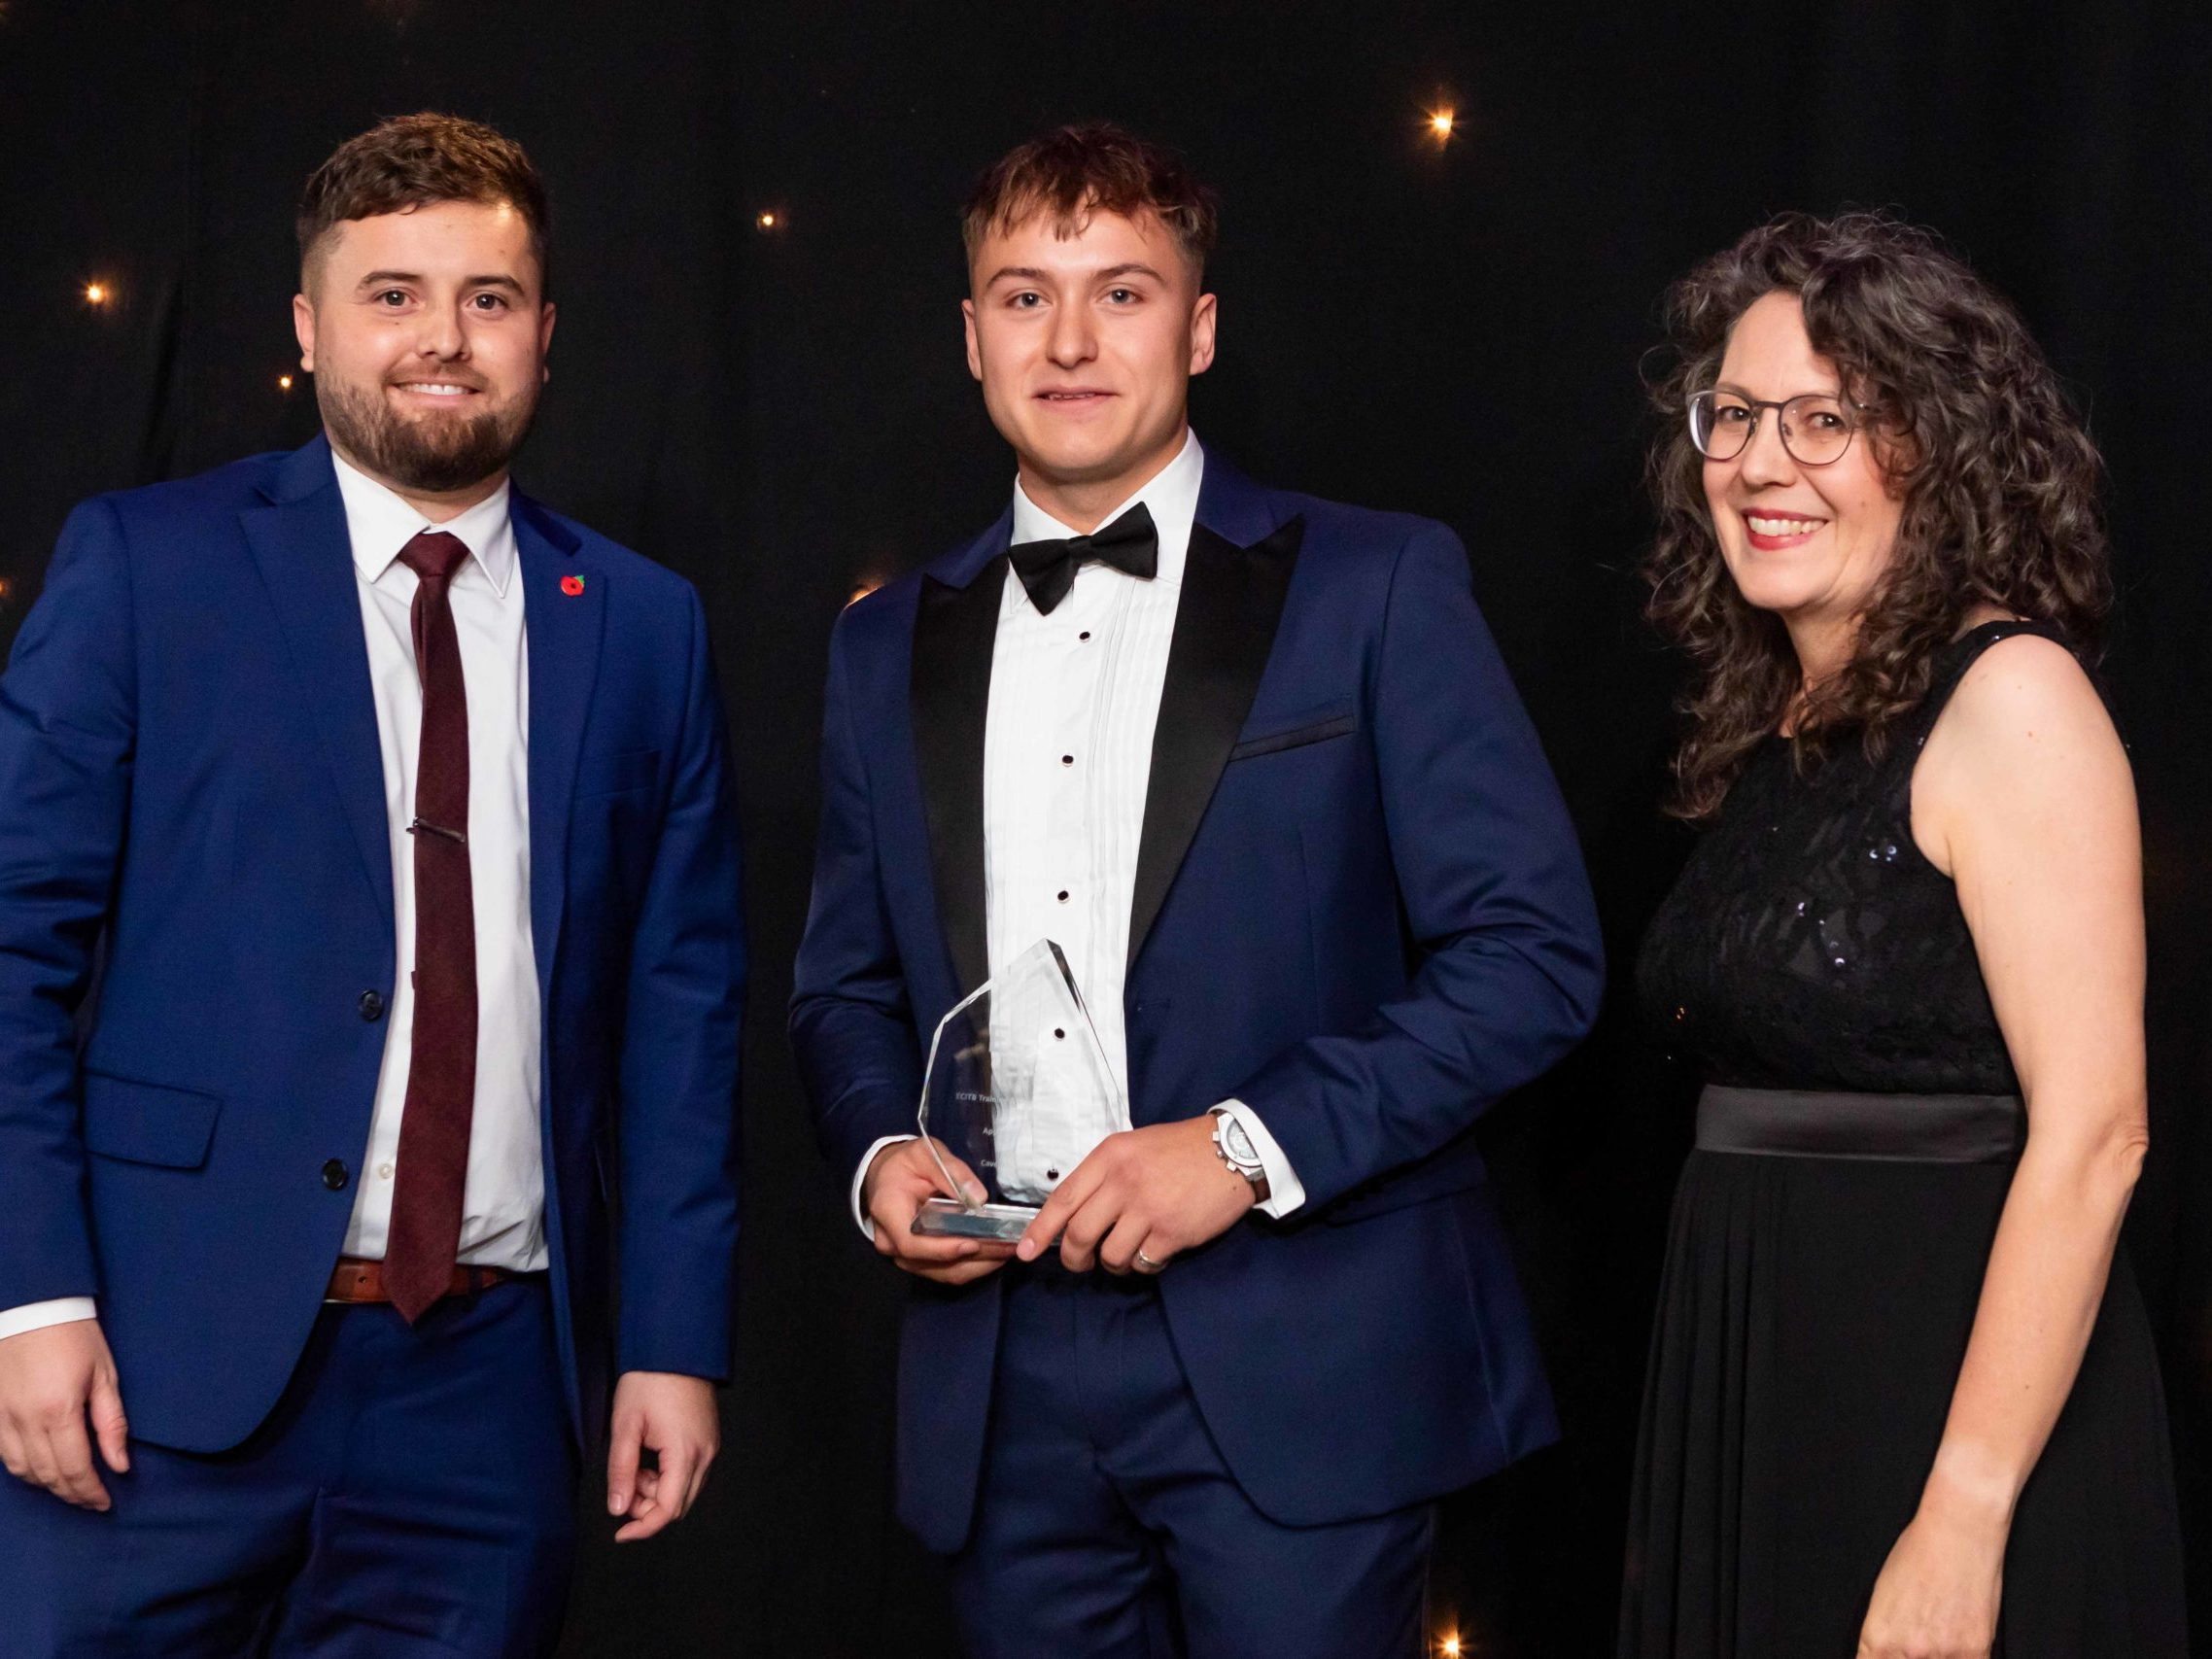 Luke Turner From Cavendish Nuclear Reveiving The Award From James Bunyan Of Sponsor CP Engineering And Host Kate Bellingham Scaled 1 Aspect Ratio 800 600